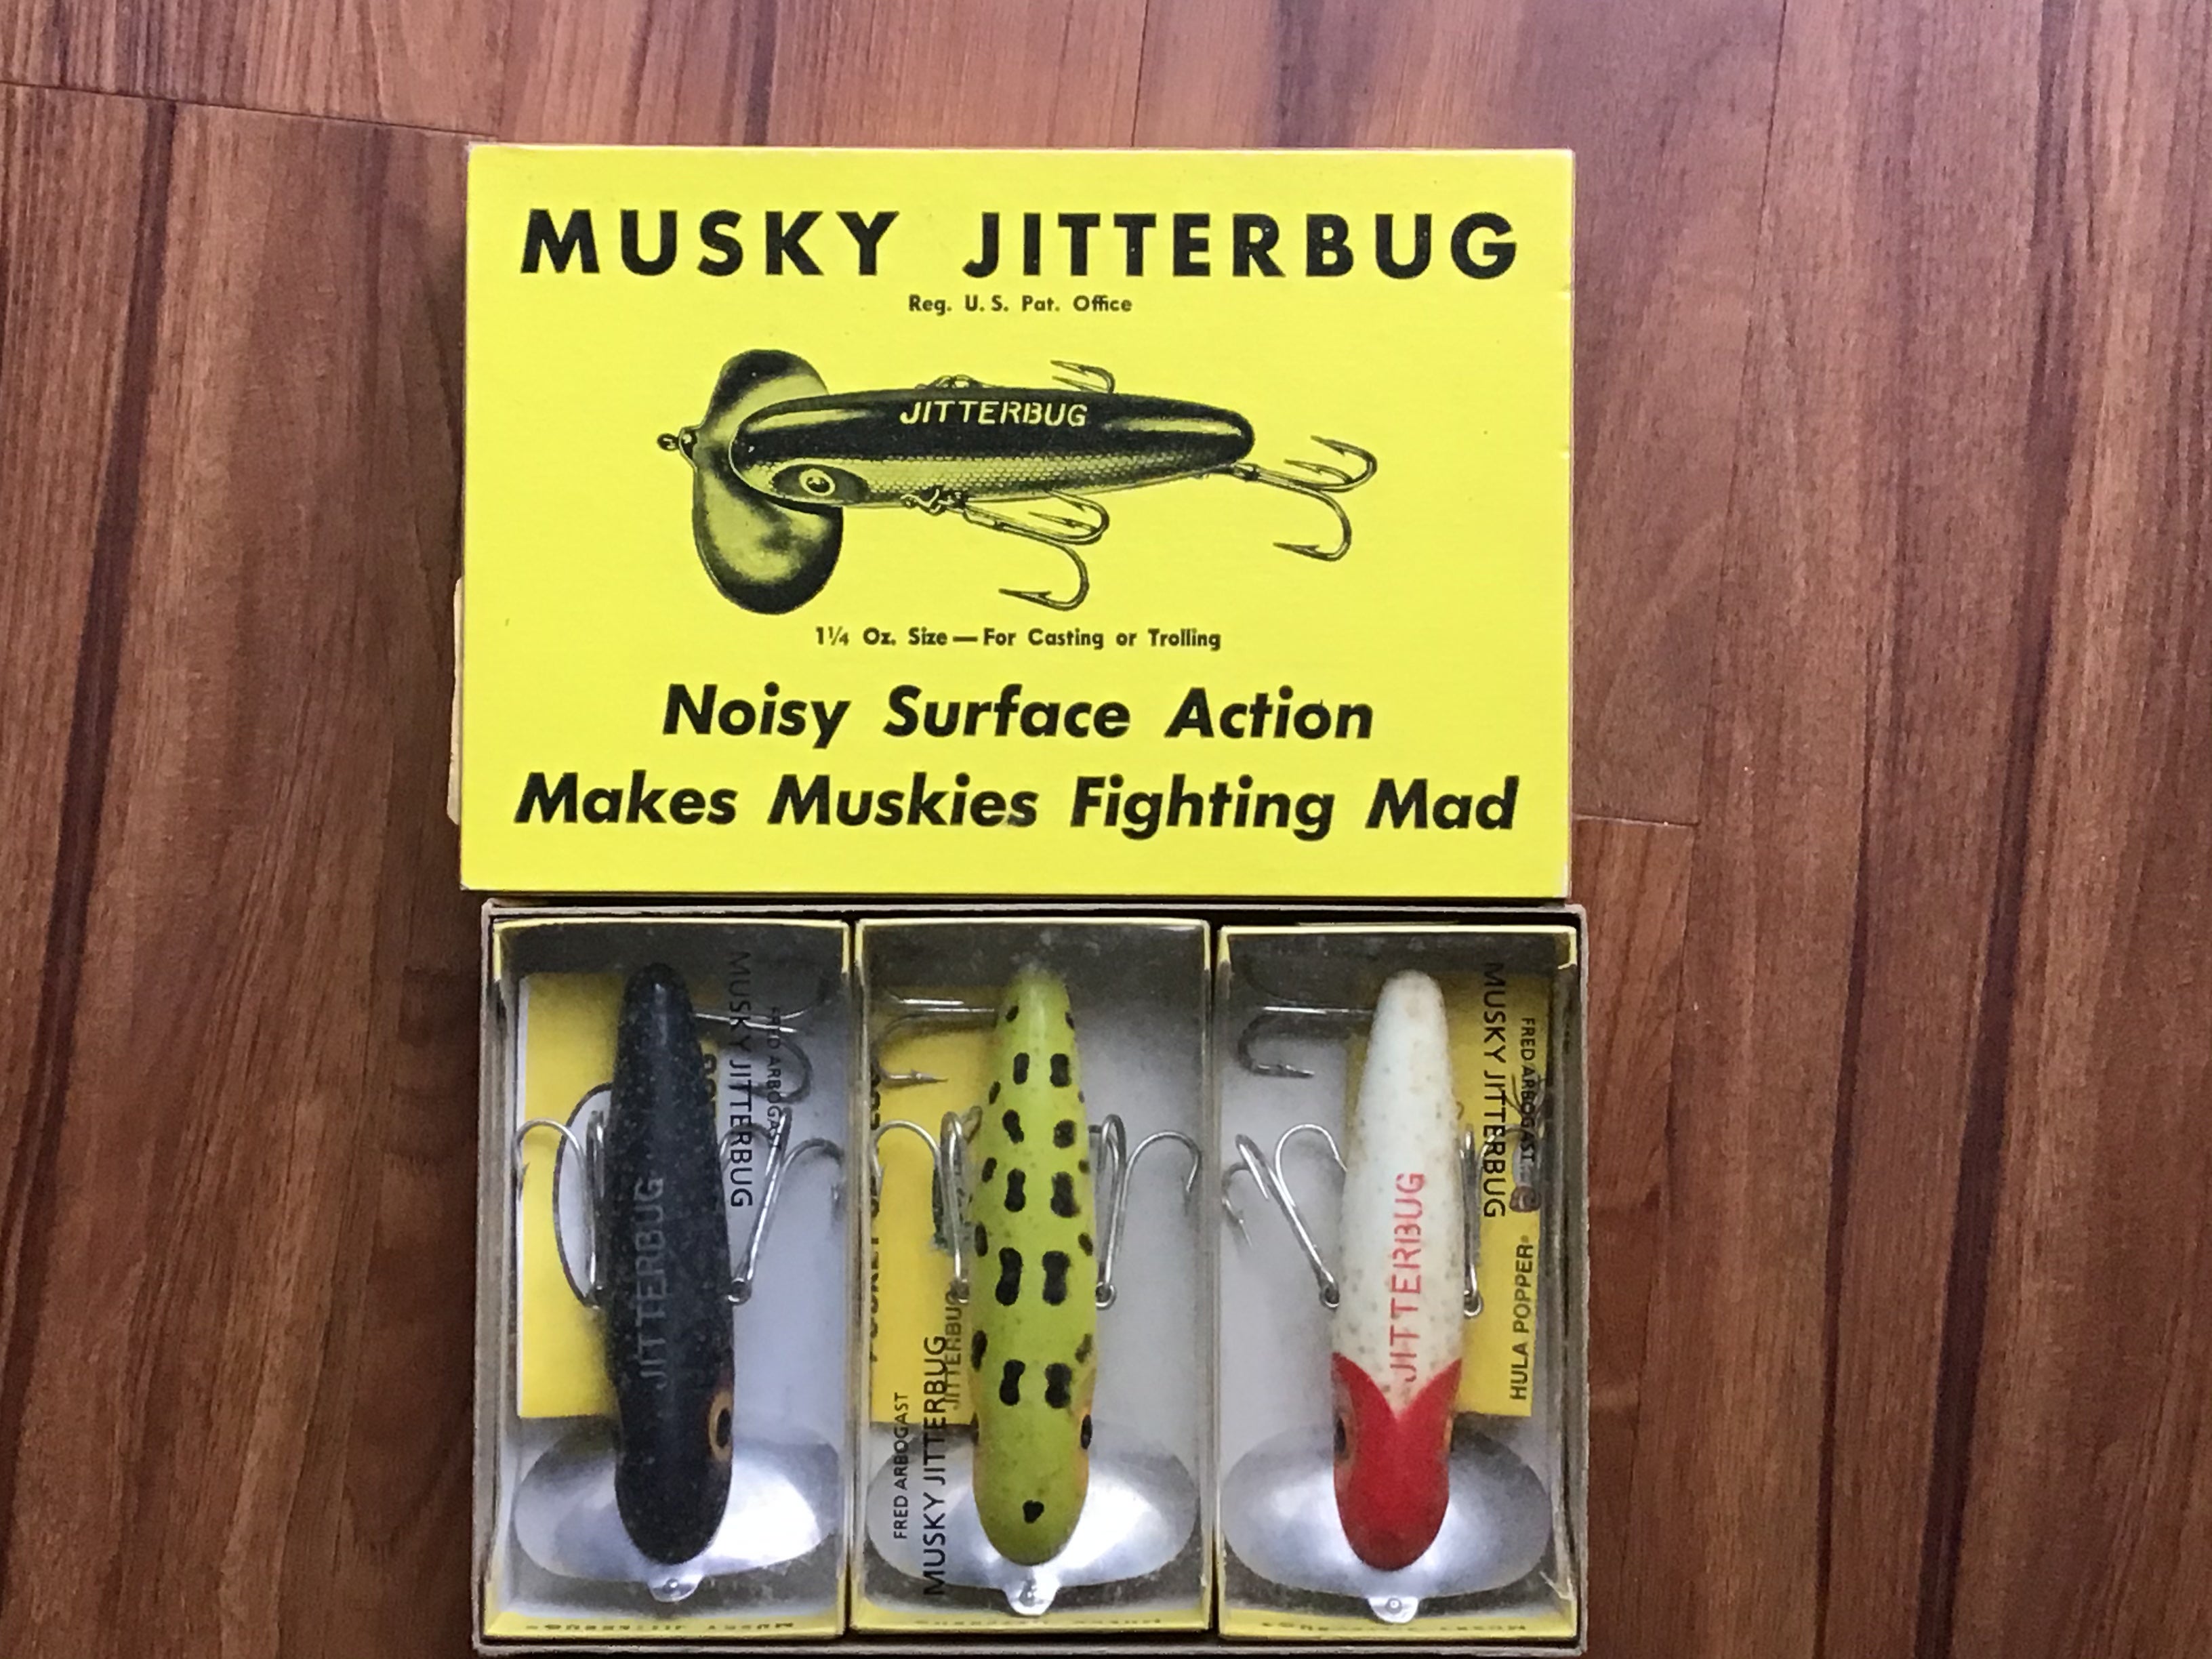 Vintage Fred Arbogast 5” Muskie Jitterbug Fishing Lure - Yellow Color